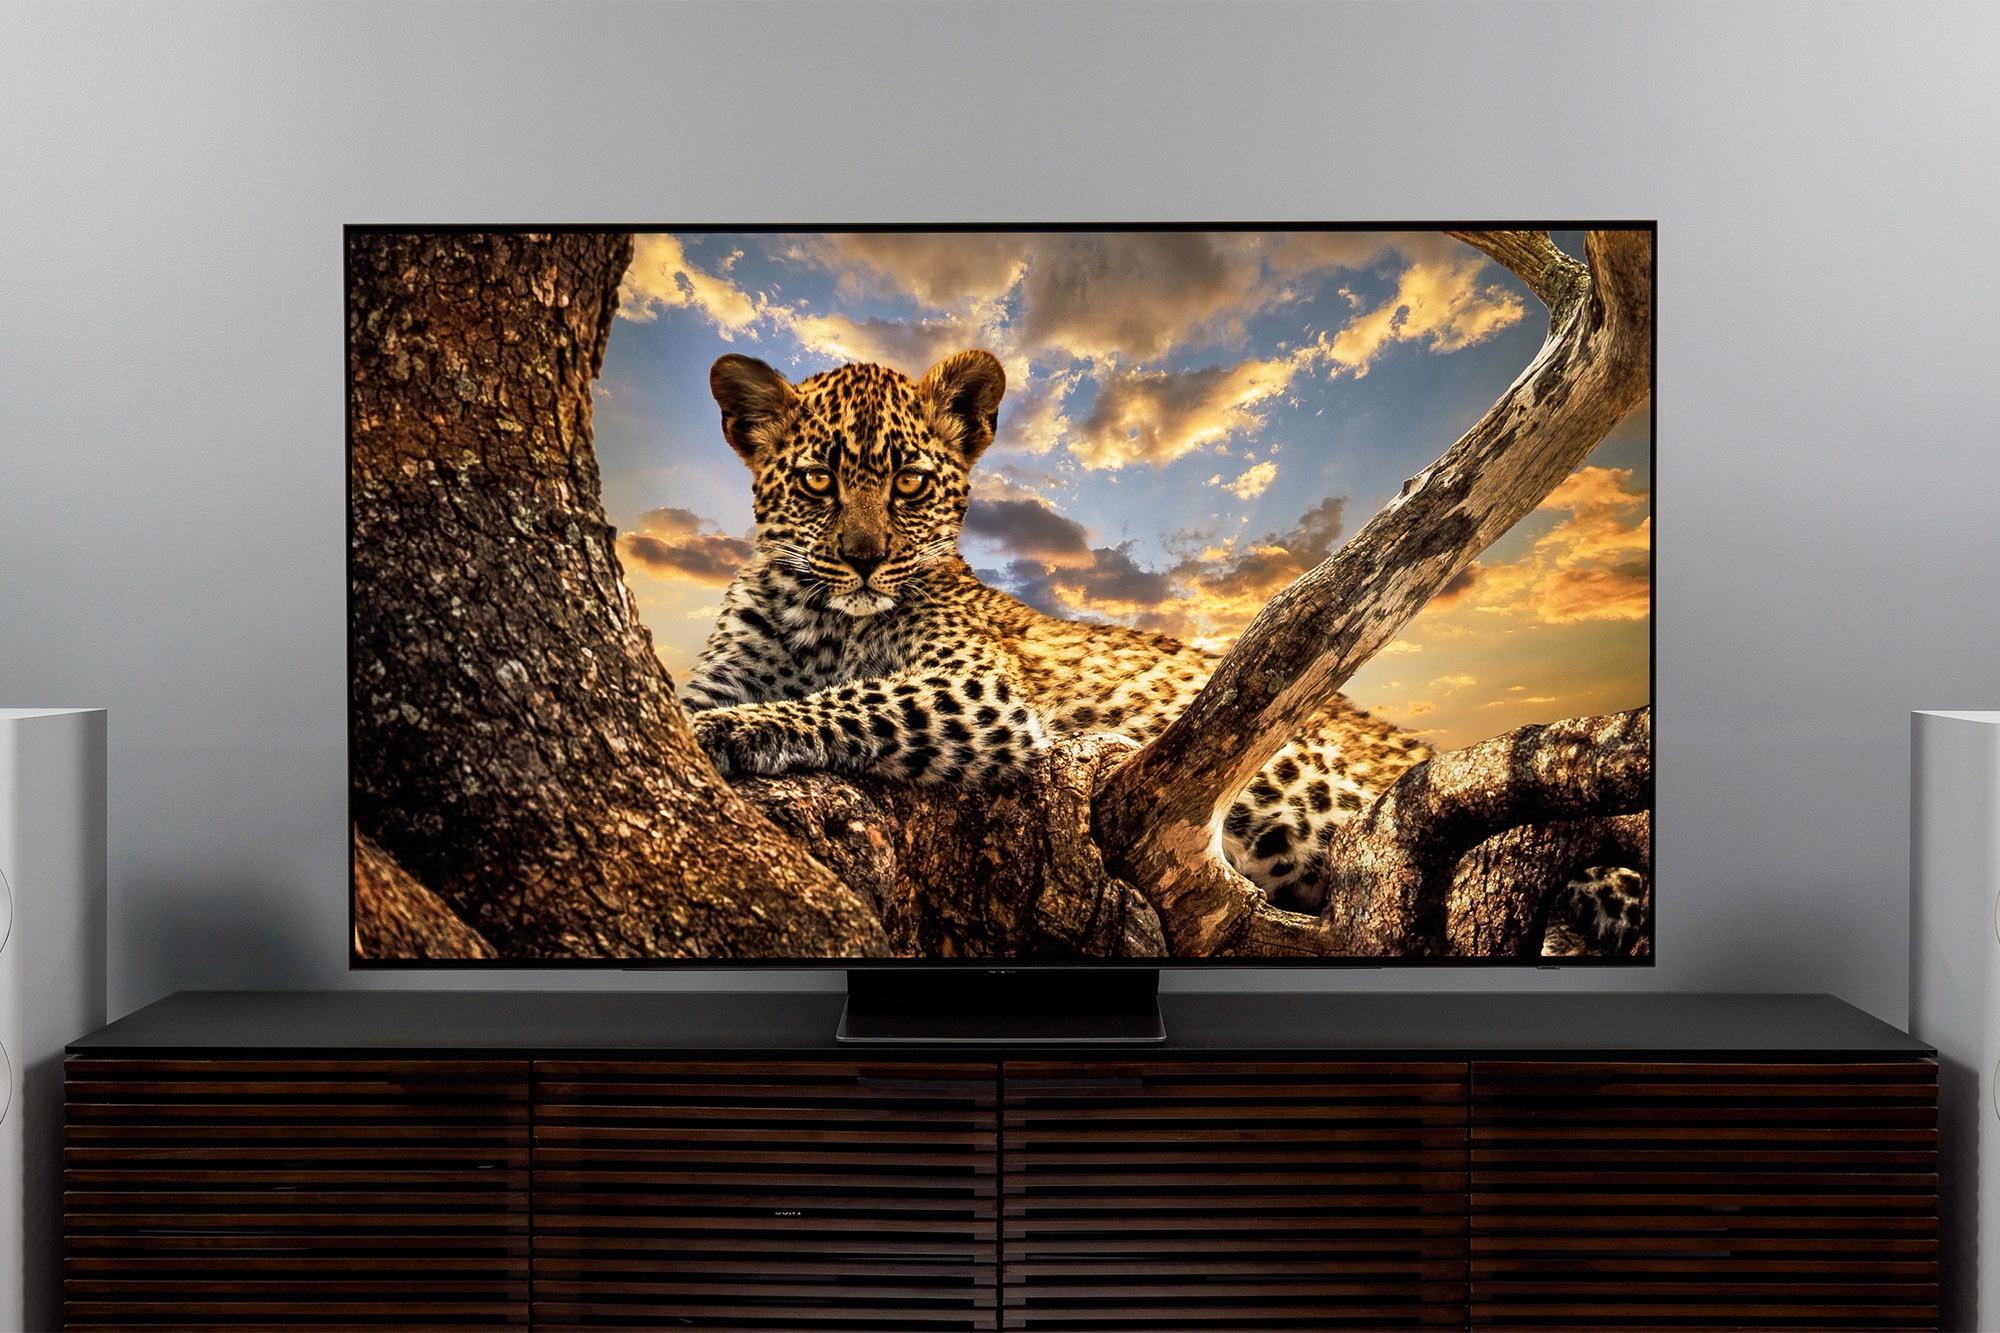 Samsung S95B OLED 4K TV Review: High-End Picture With Quantum Dot